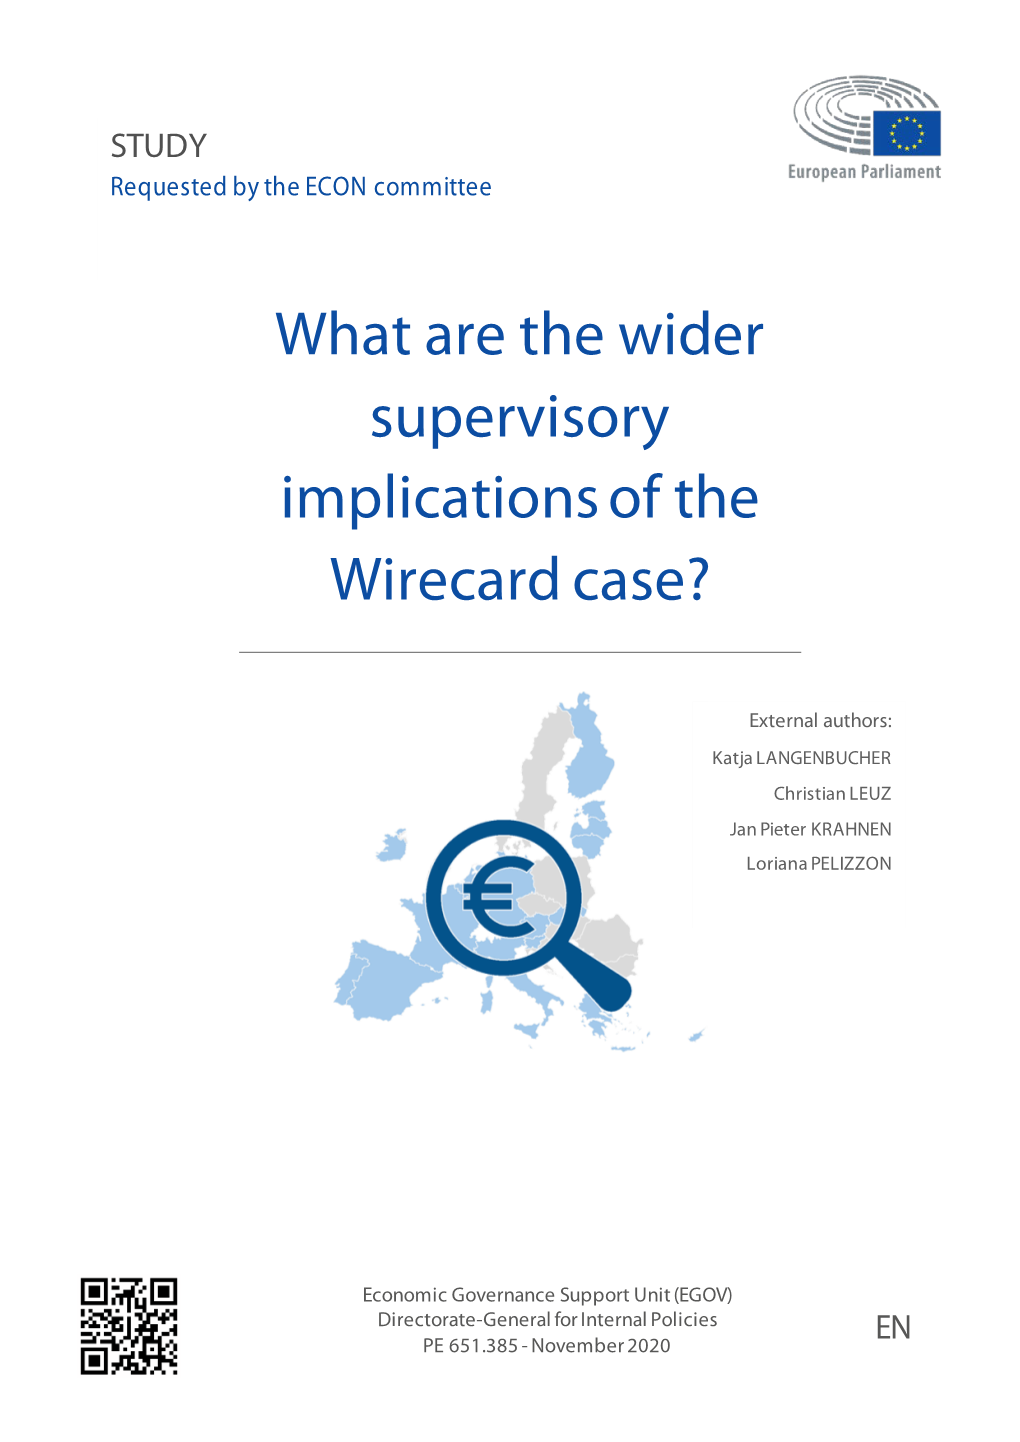 What Are the Wider Supervisory Implications of the Wirecard Case?